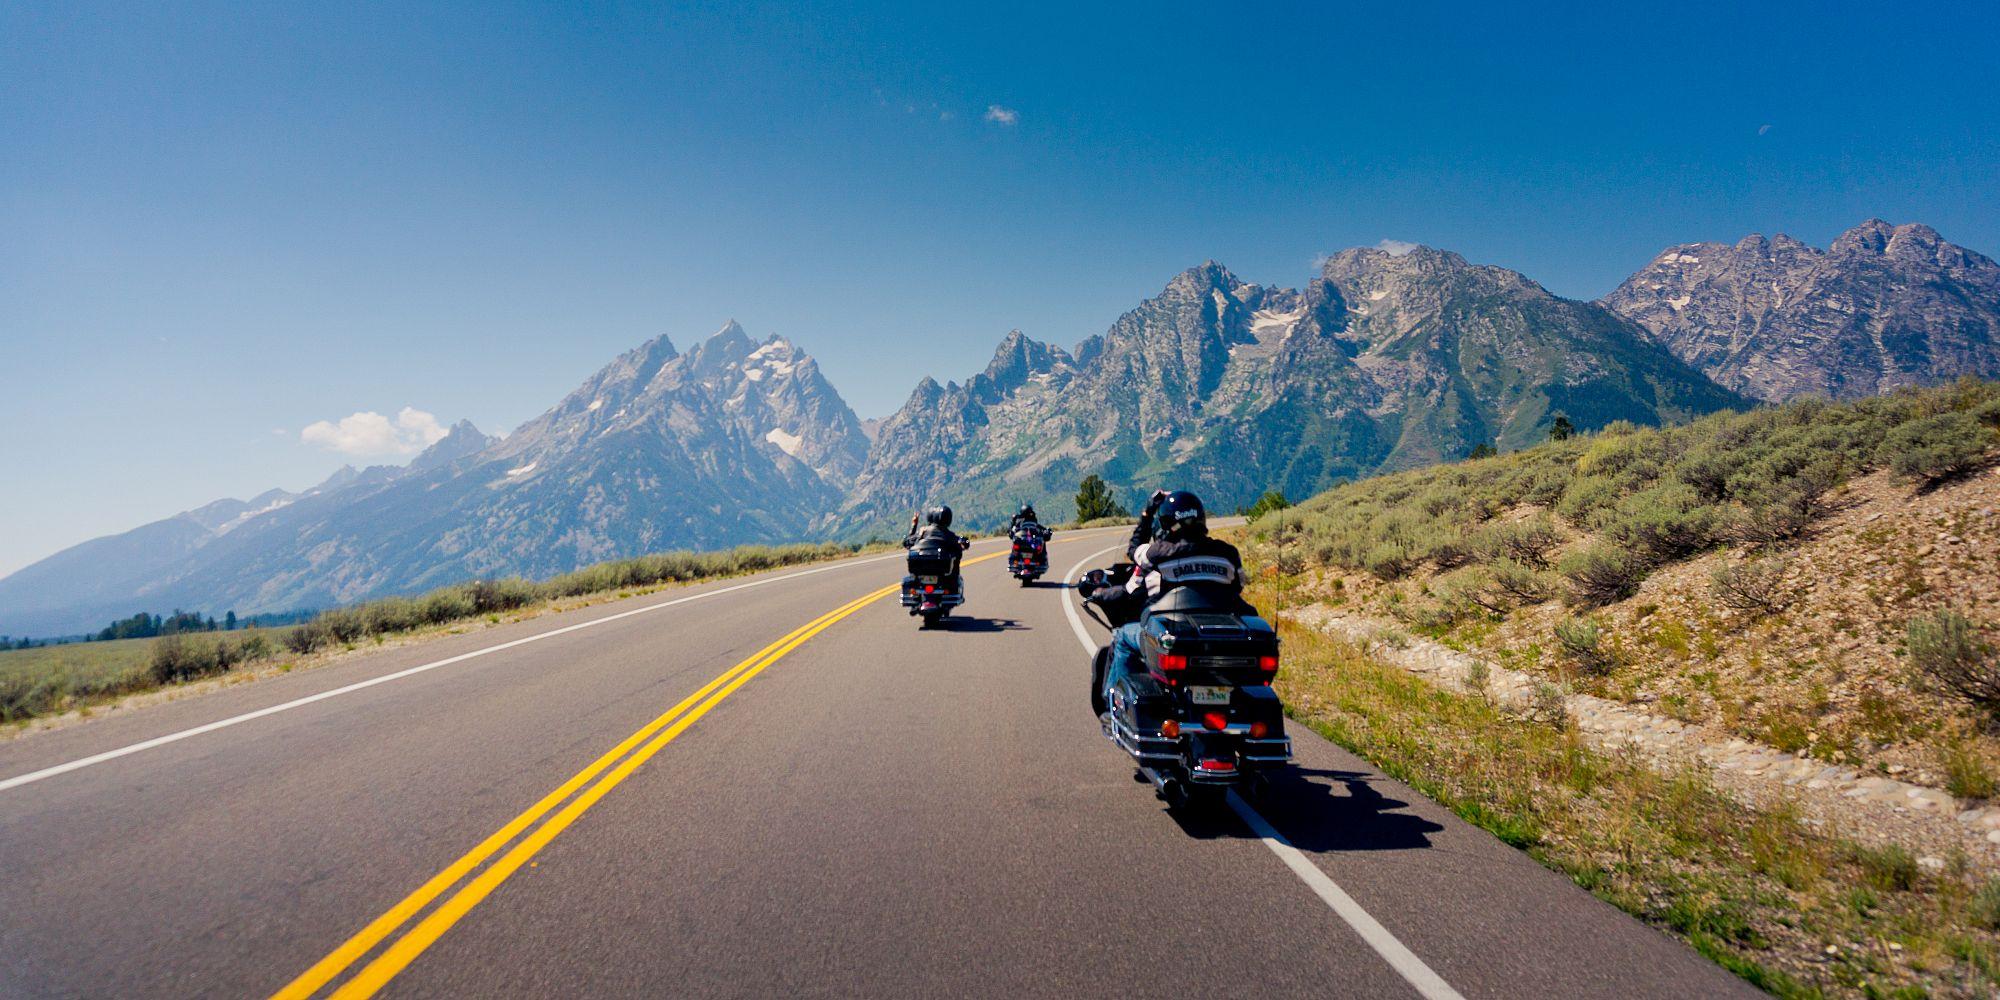 Ride the Best of the Rockies & BC with Freedom Biker Tours